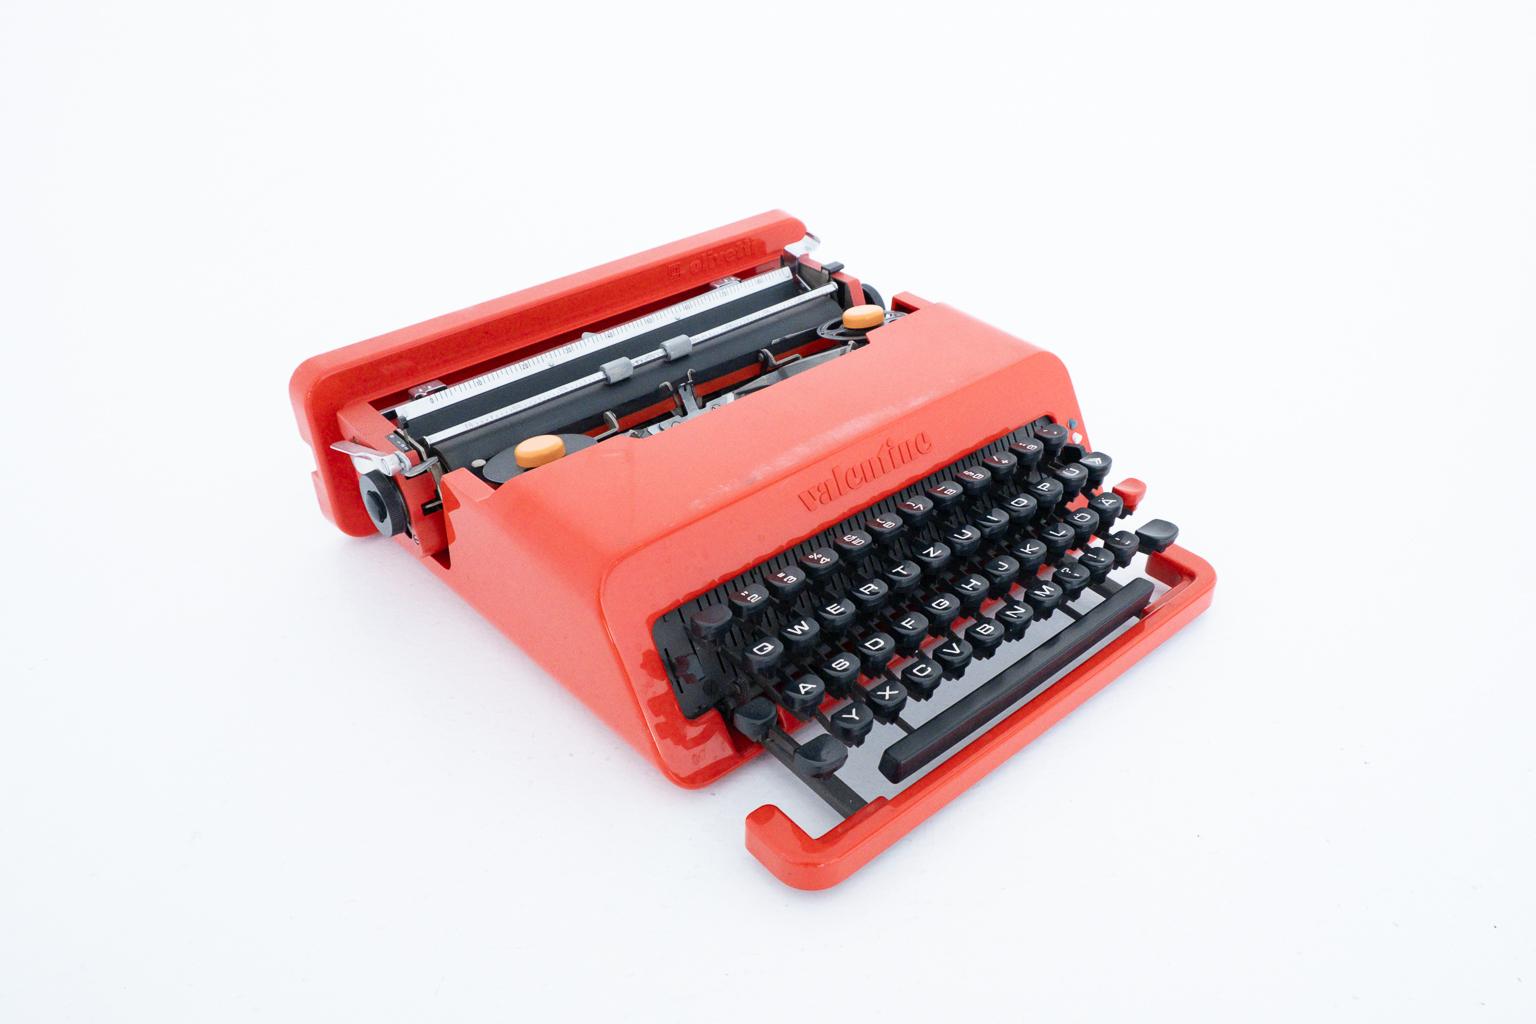 The Olivetti Valentine is a portable, mechanical, travel typewriter that was manufactured by the Italian company Olivetti from 1969 to 2000. It is known for its unconventional design, which was created by the Italian designer Ettore Sottsass